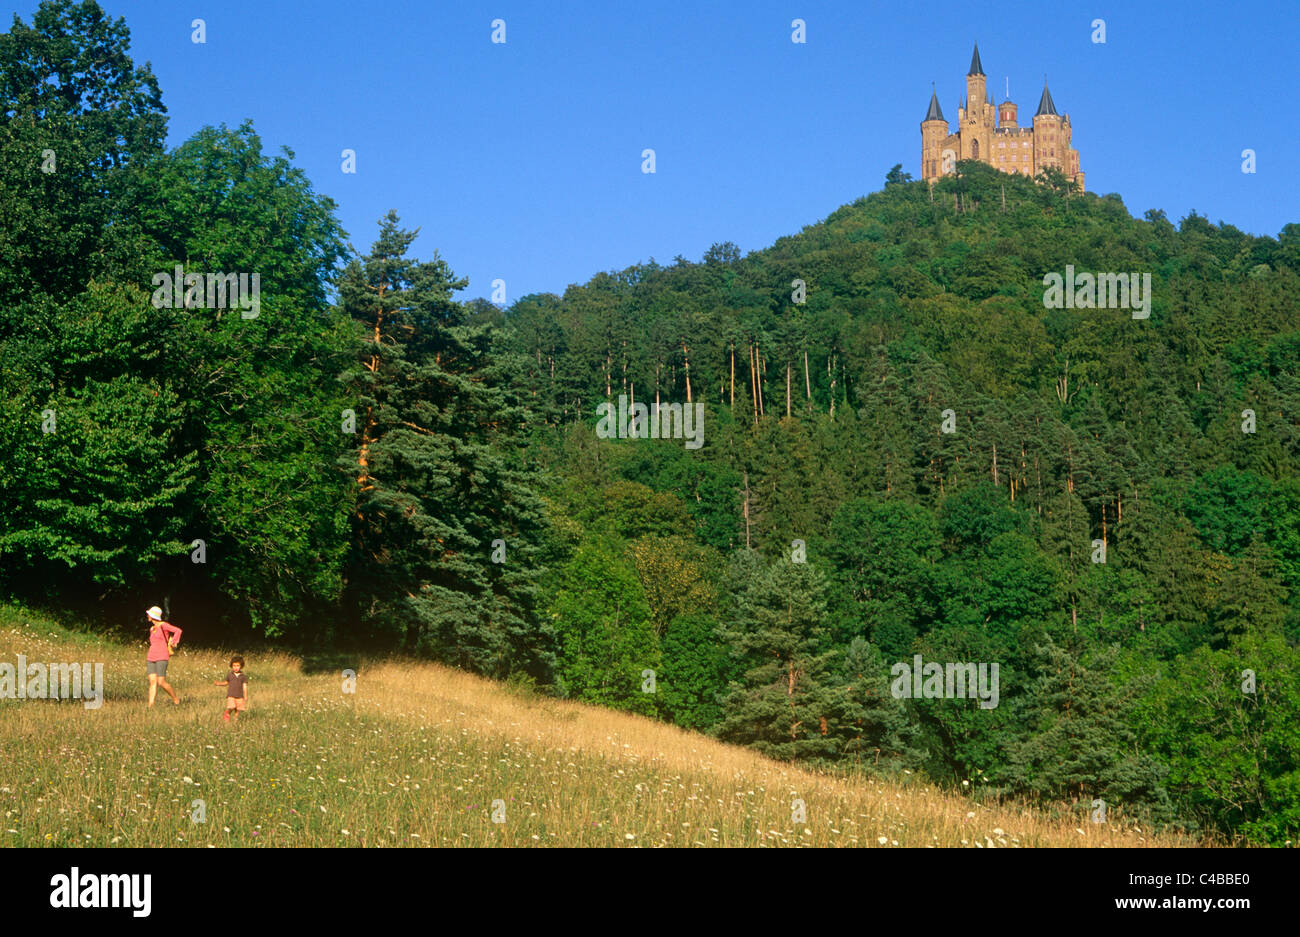 Germany, Baden-Wurttemberg, Swabia, Hechingen. Situated in the foothills of the Swabian Alps, Hohenzollern Castle was the medieval ancestral seat of the Hohenzollerns who became Germany's emperors. Built in the mid-1800s for Frederick William IV of Prussia, the existing castle is a popular tourist attraction. Stock Photo